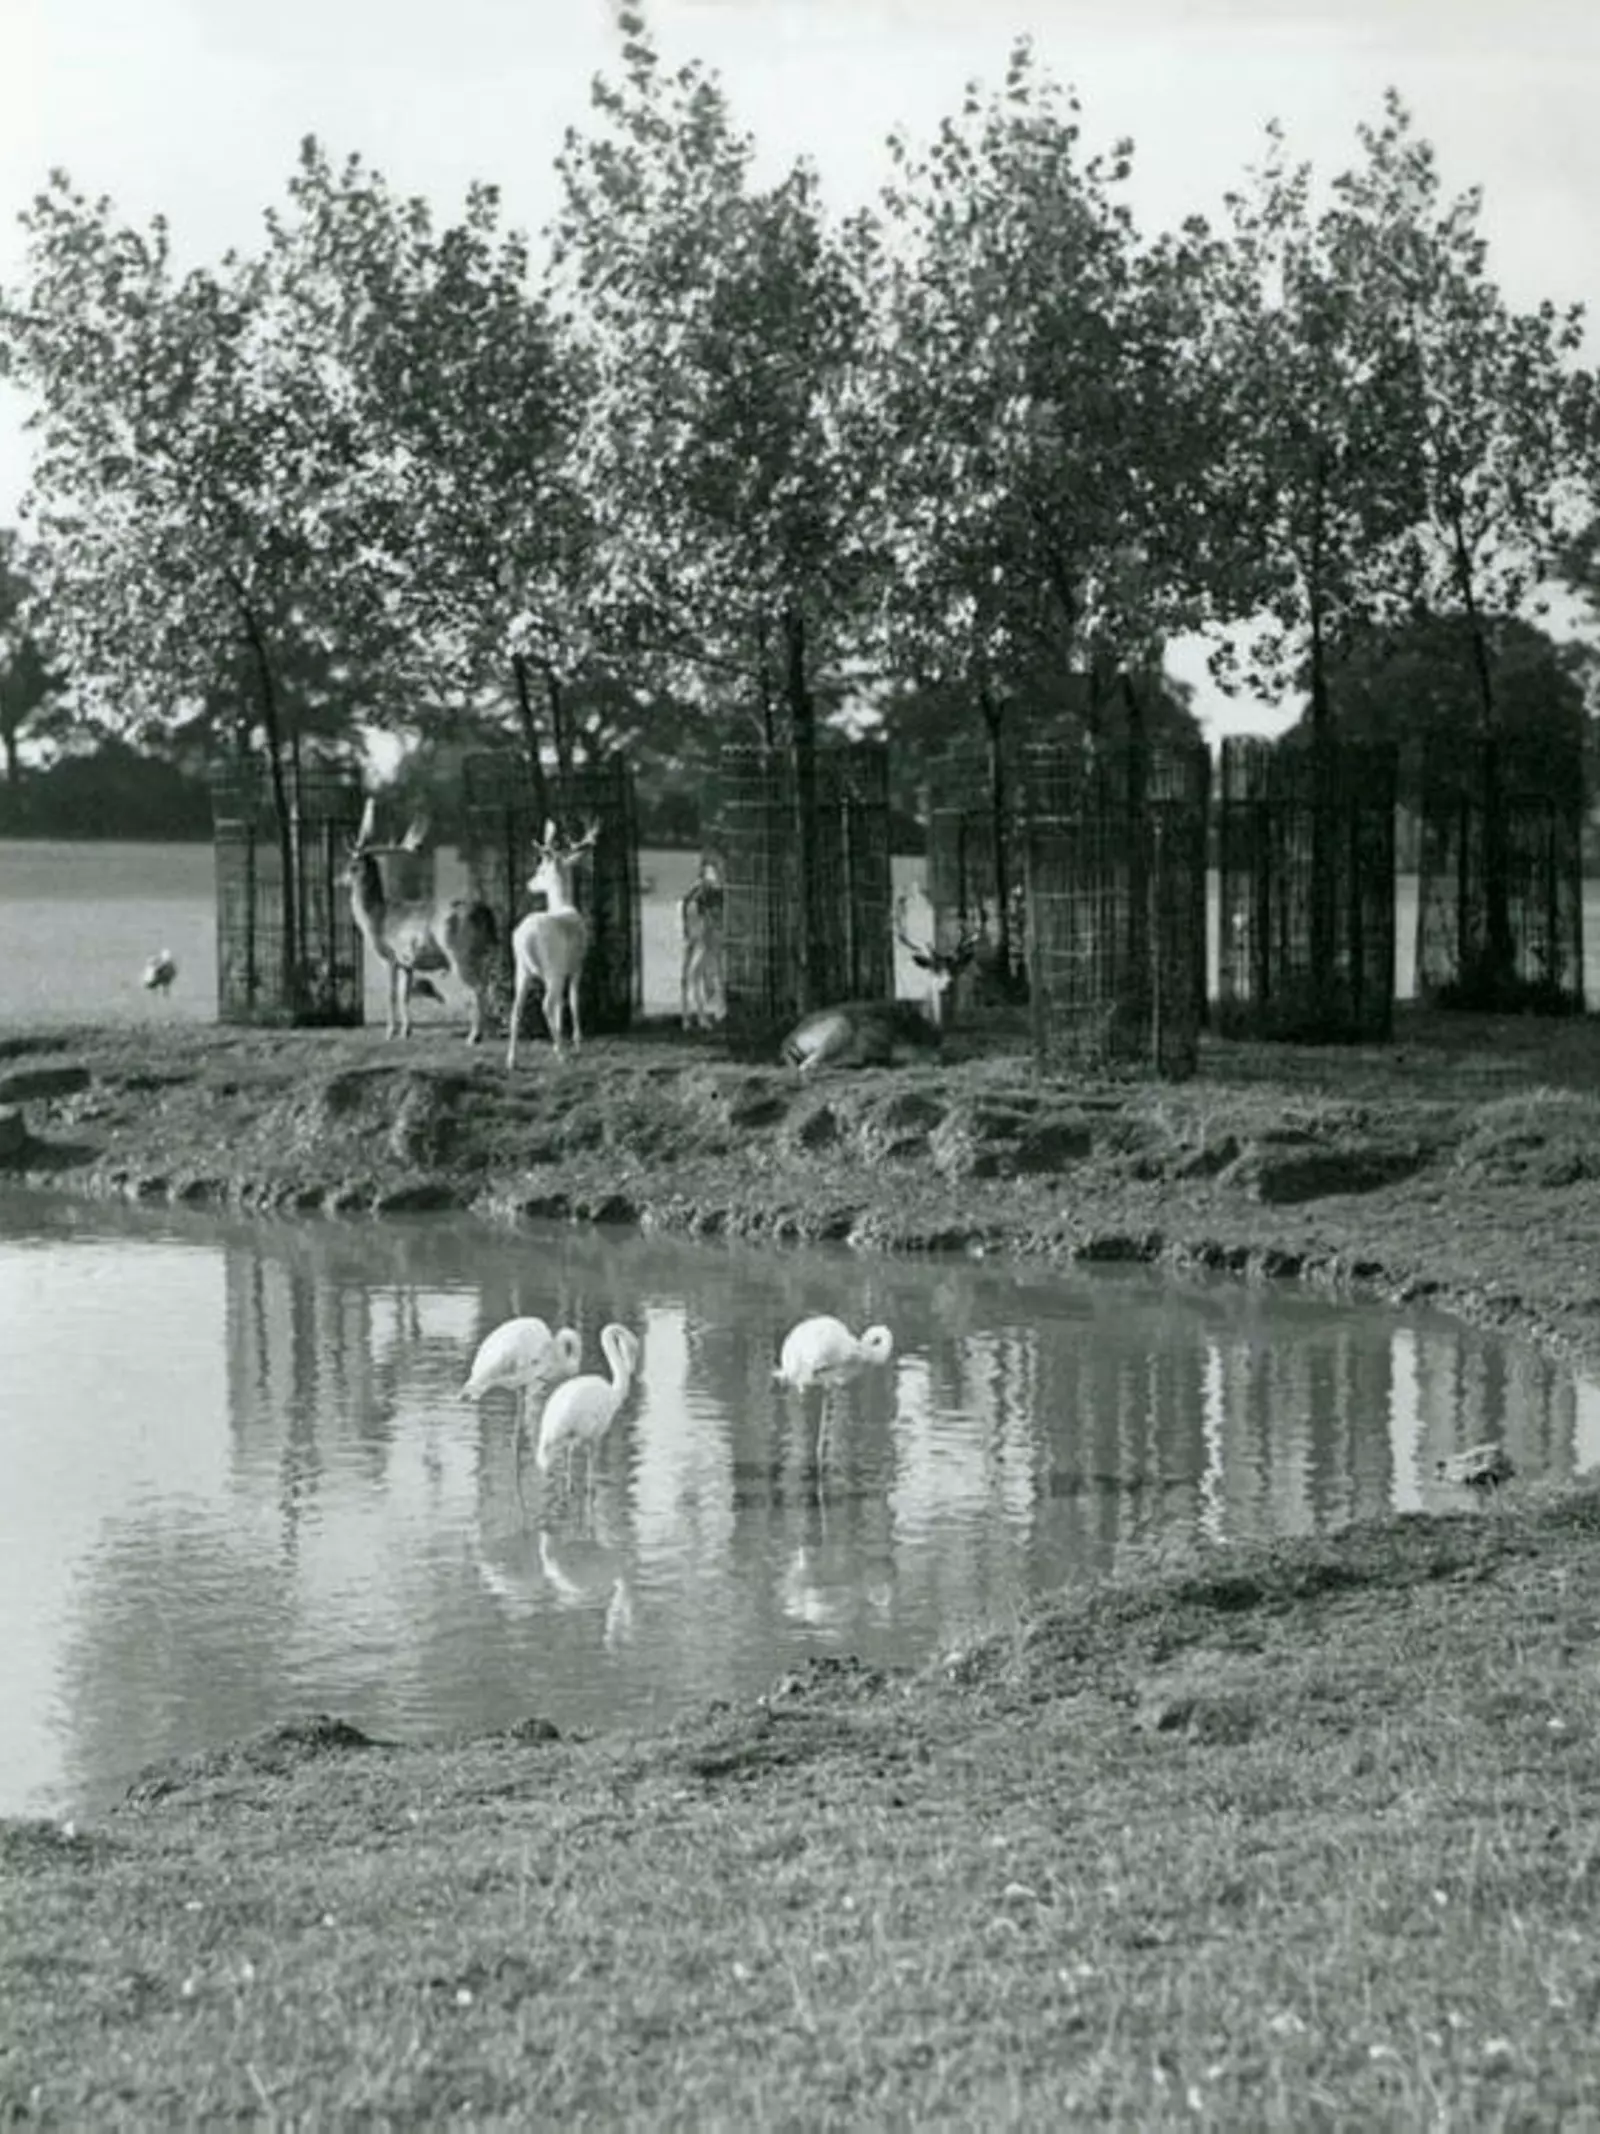 Greater flamingo, Fallow Deer and a Canada Goose at a pond at Whipsnade in September 1934. The Deer are sheltering under small trees which have tree guards around their trunks.